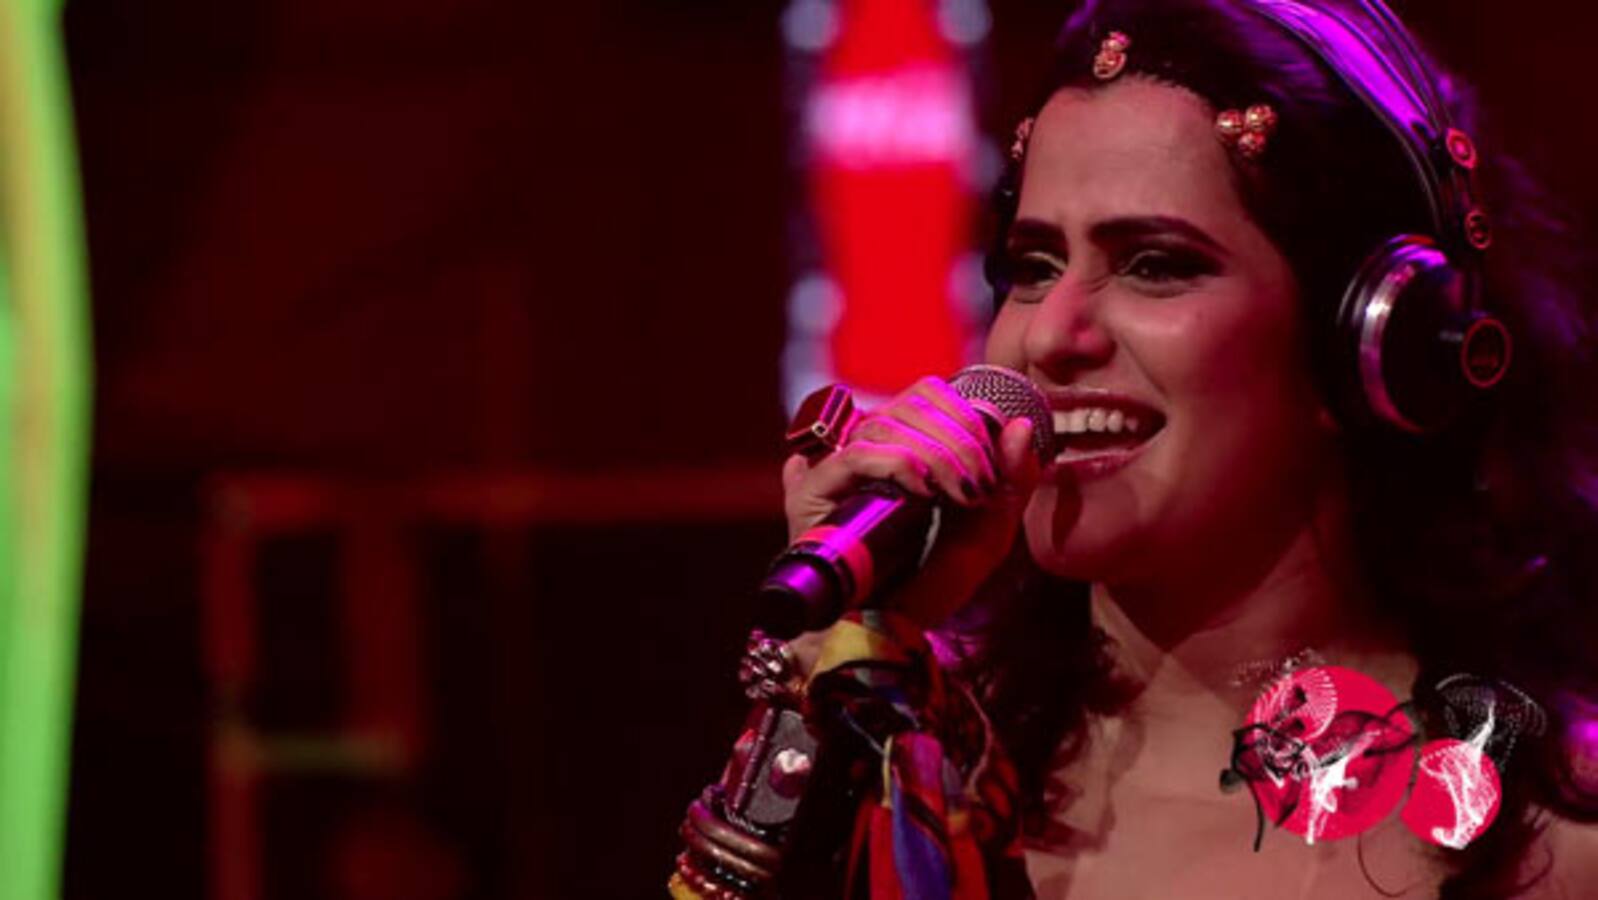 Sona Mohapatra Gives Iit Bombay A Befitting Reply After They Asked Her To Perform With A Man At